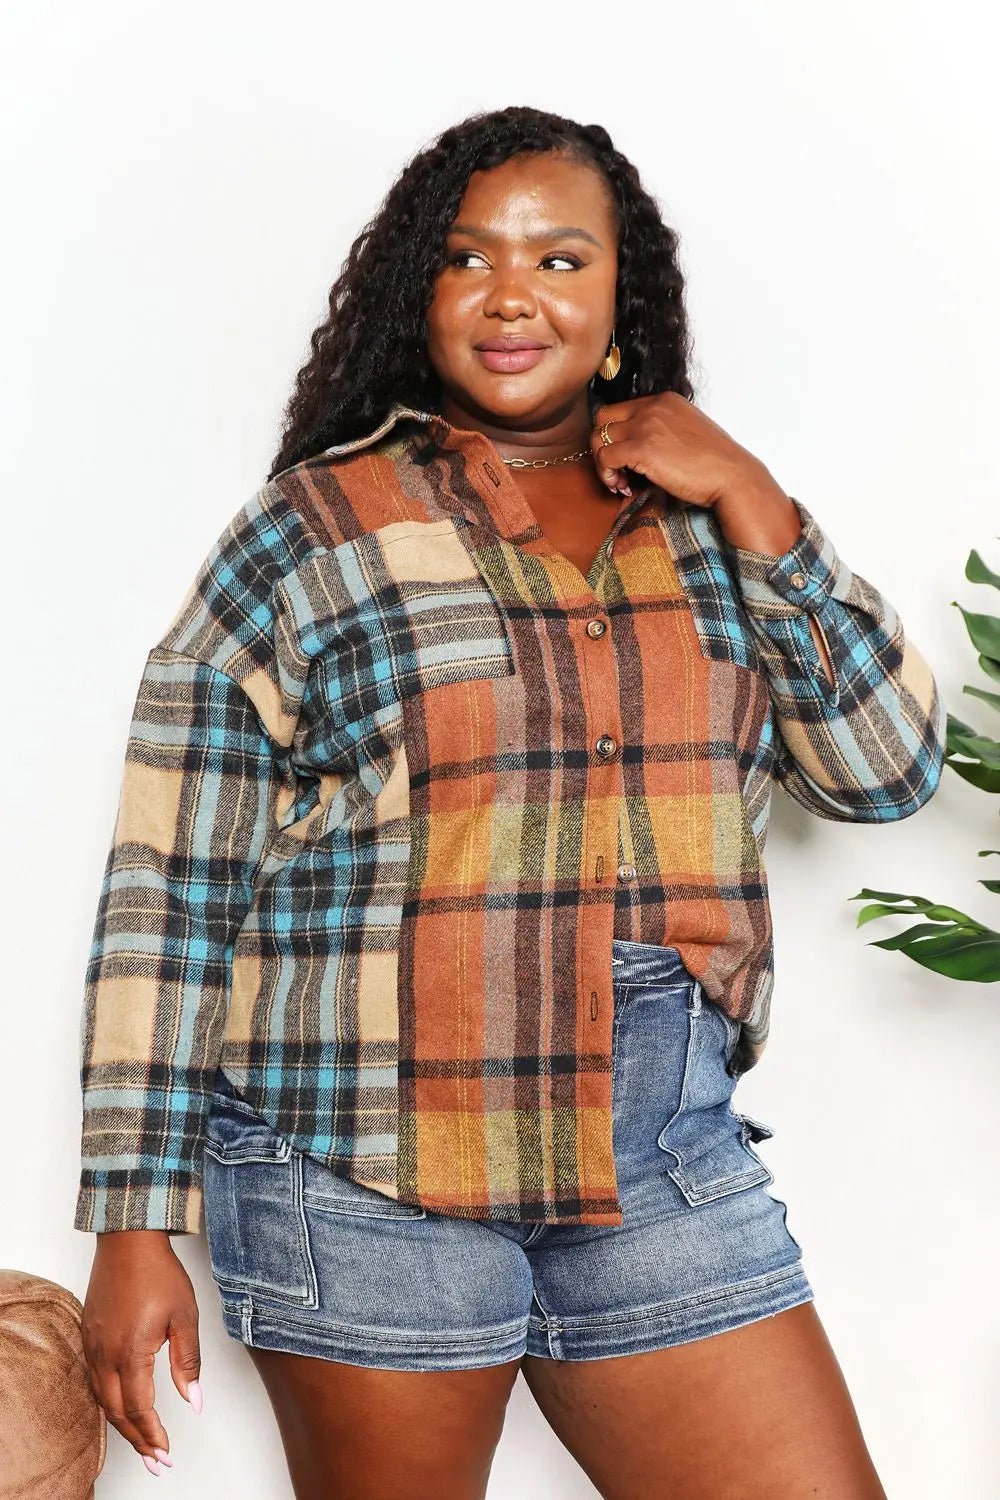 CURVED HEM LONG SLEEVE BUTTON DOWN FLANNEL MULTICOLOR - MeadeuxCURVED HEM LONG SLEEVE BUTTON DOWN FLANNEL MULTICOLORTopsMeadeux